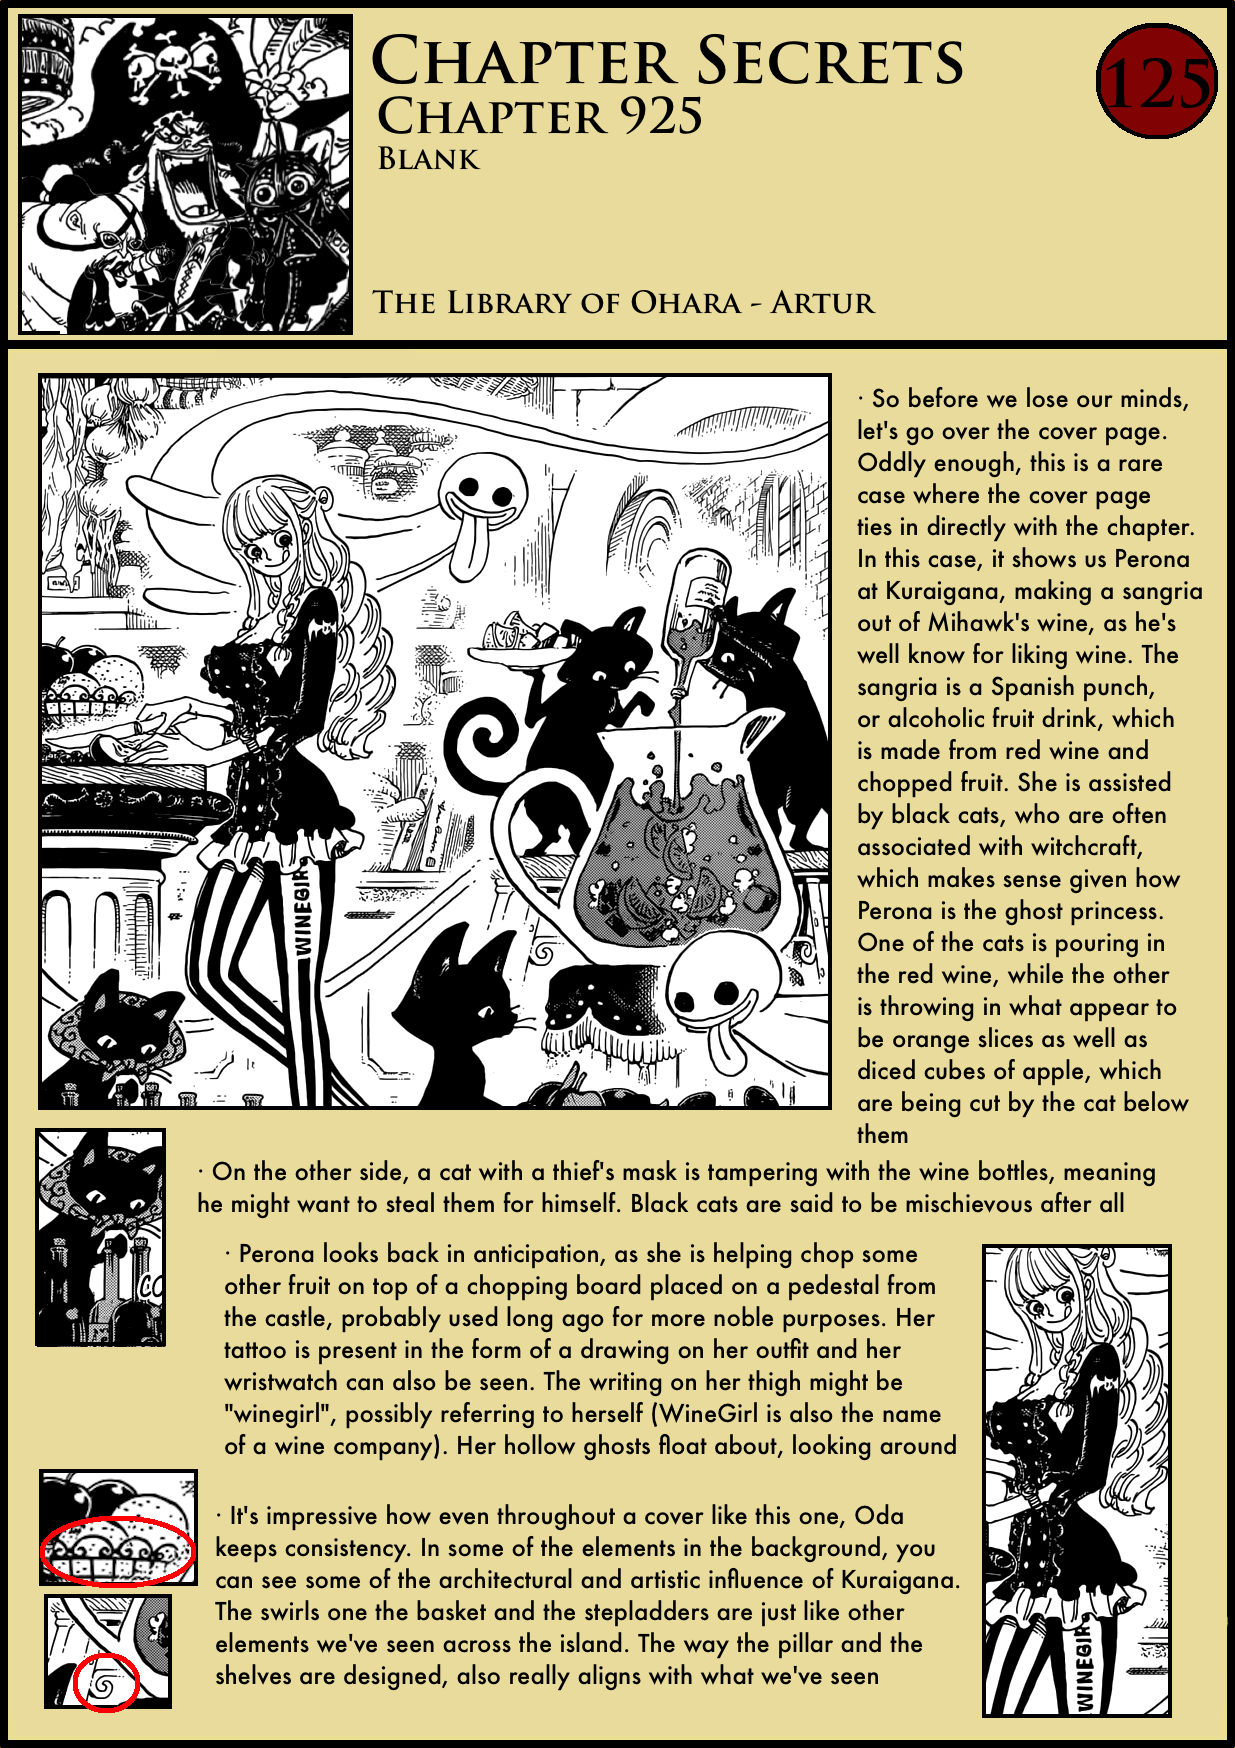 OPspoiler on X: One Piece Chapter 1045 English Translation (Not